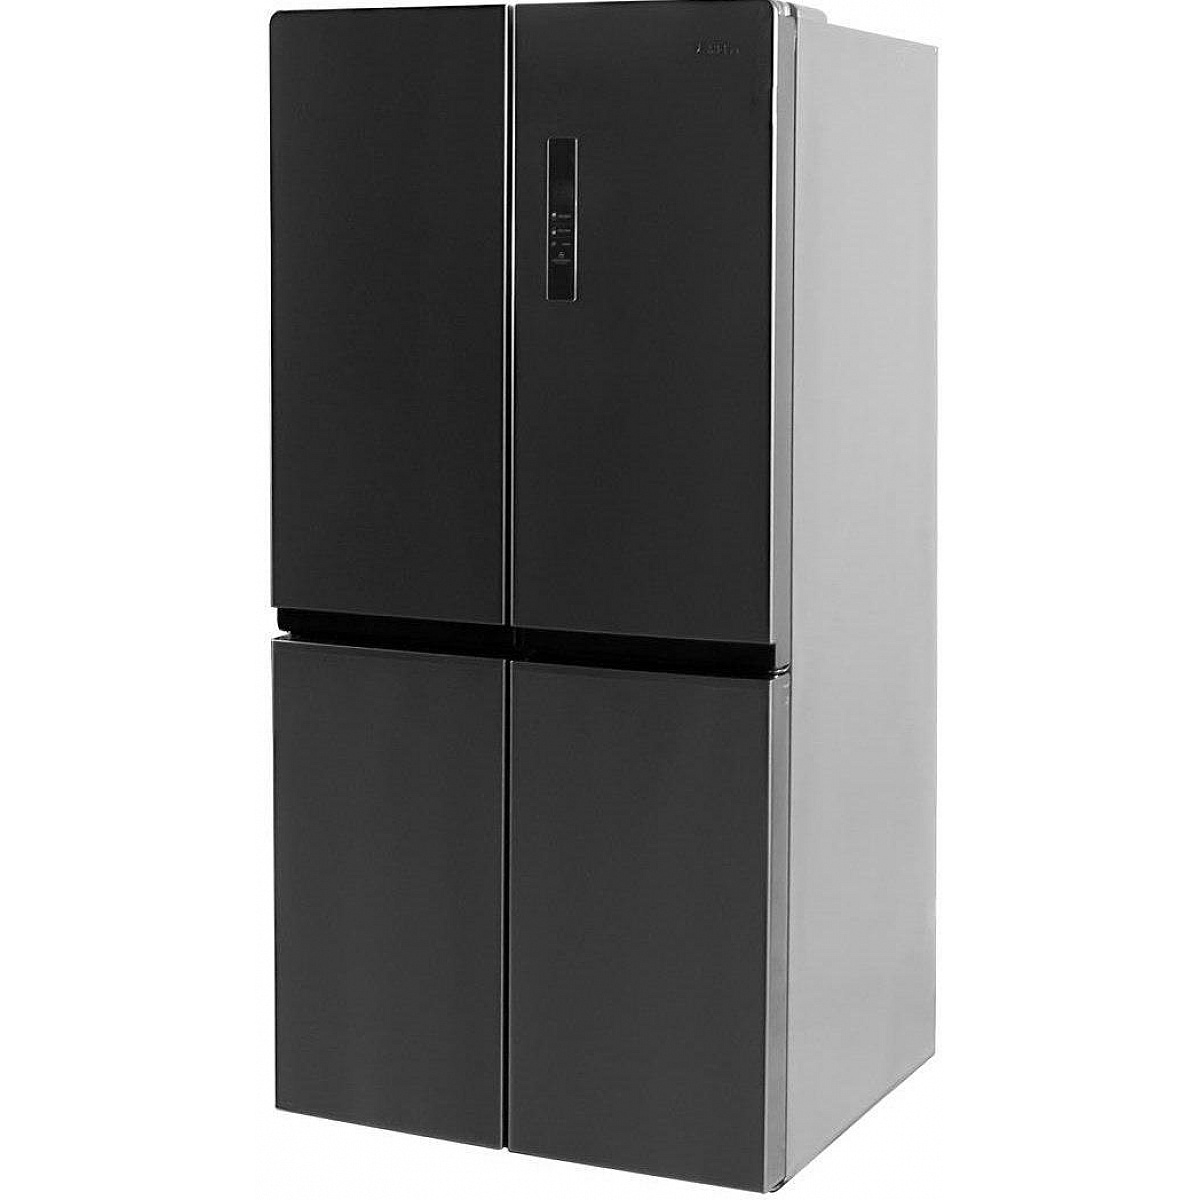 Buy Midea Side By Side Refrigerator -HQ-627WEN with Water Dispenser ...